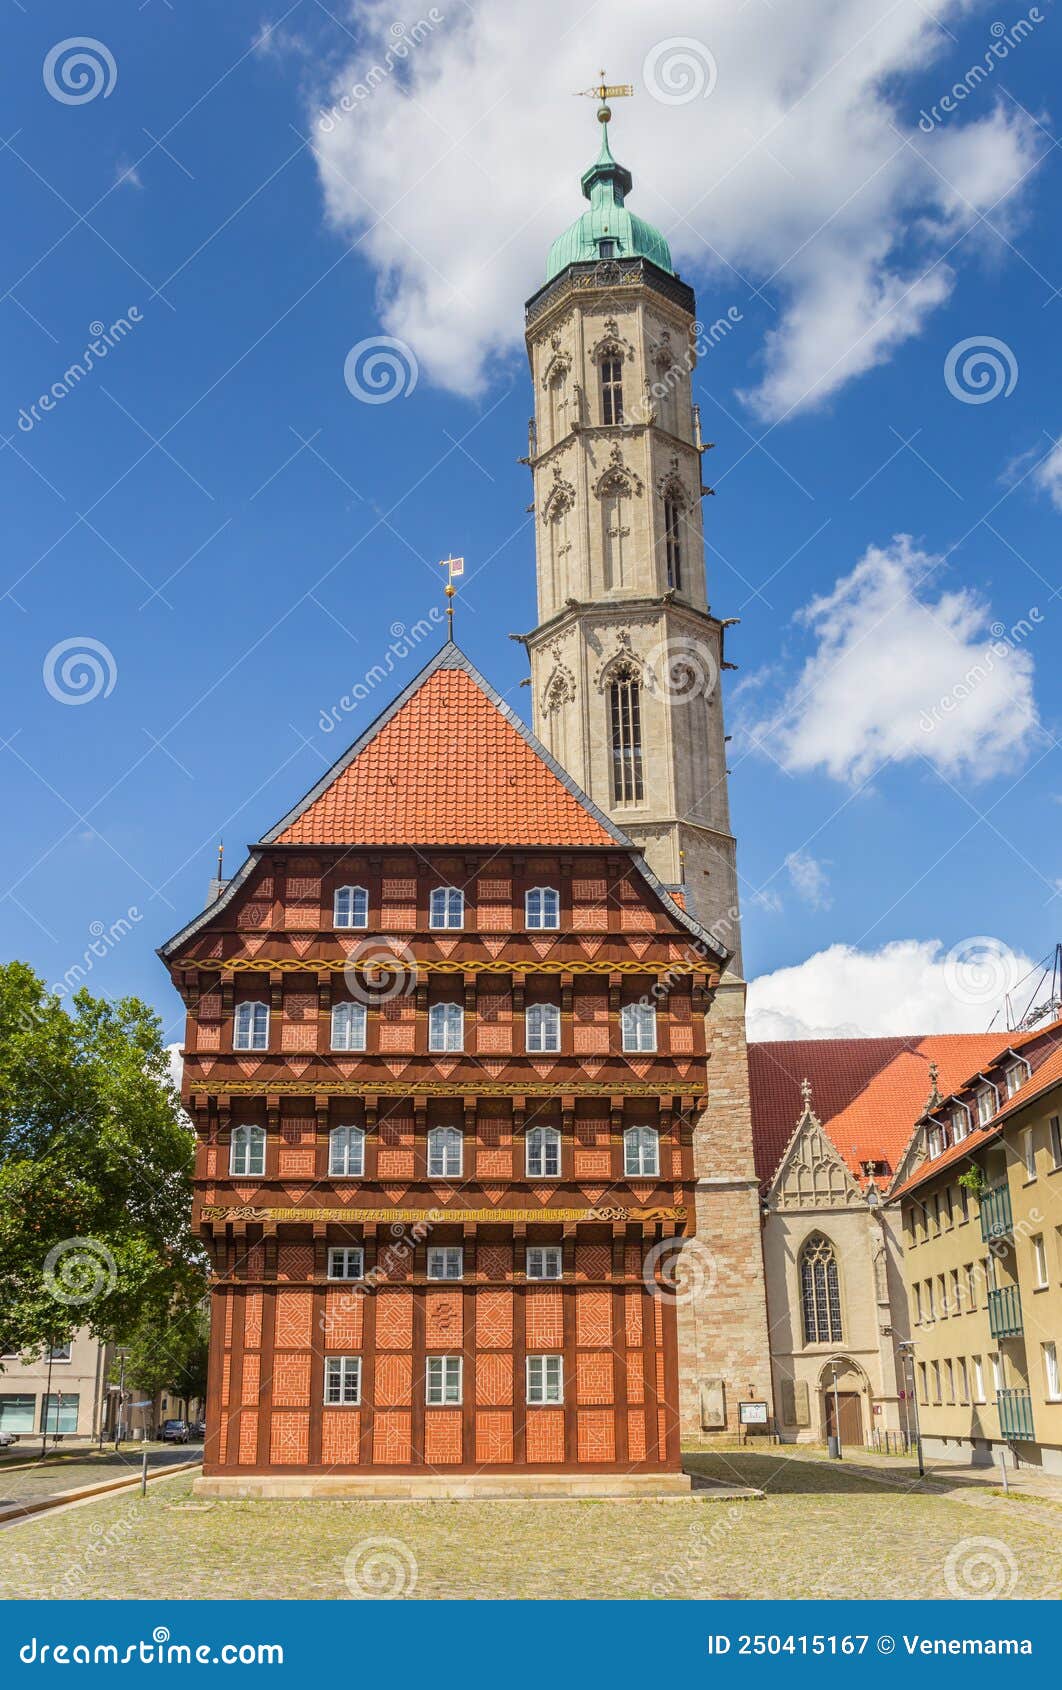 facade of the historic alte waage building and church tower in braunschweig